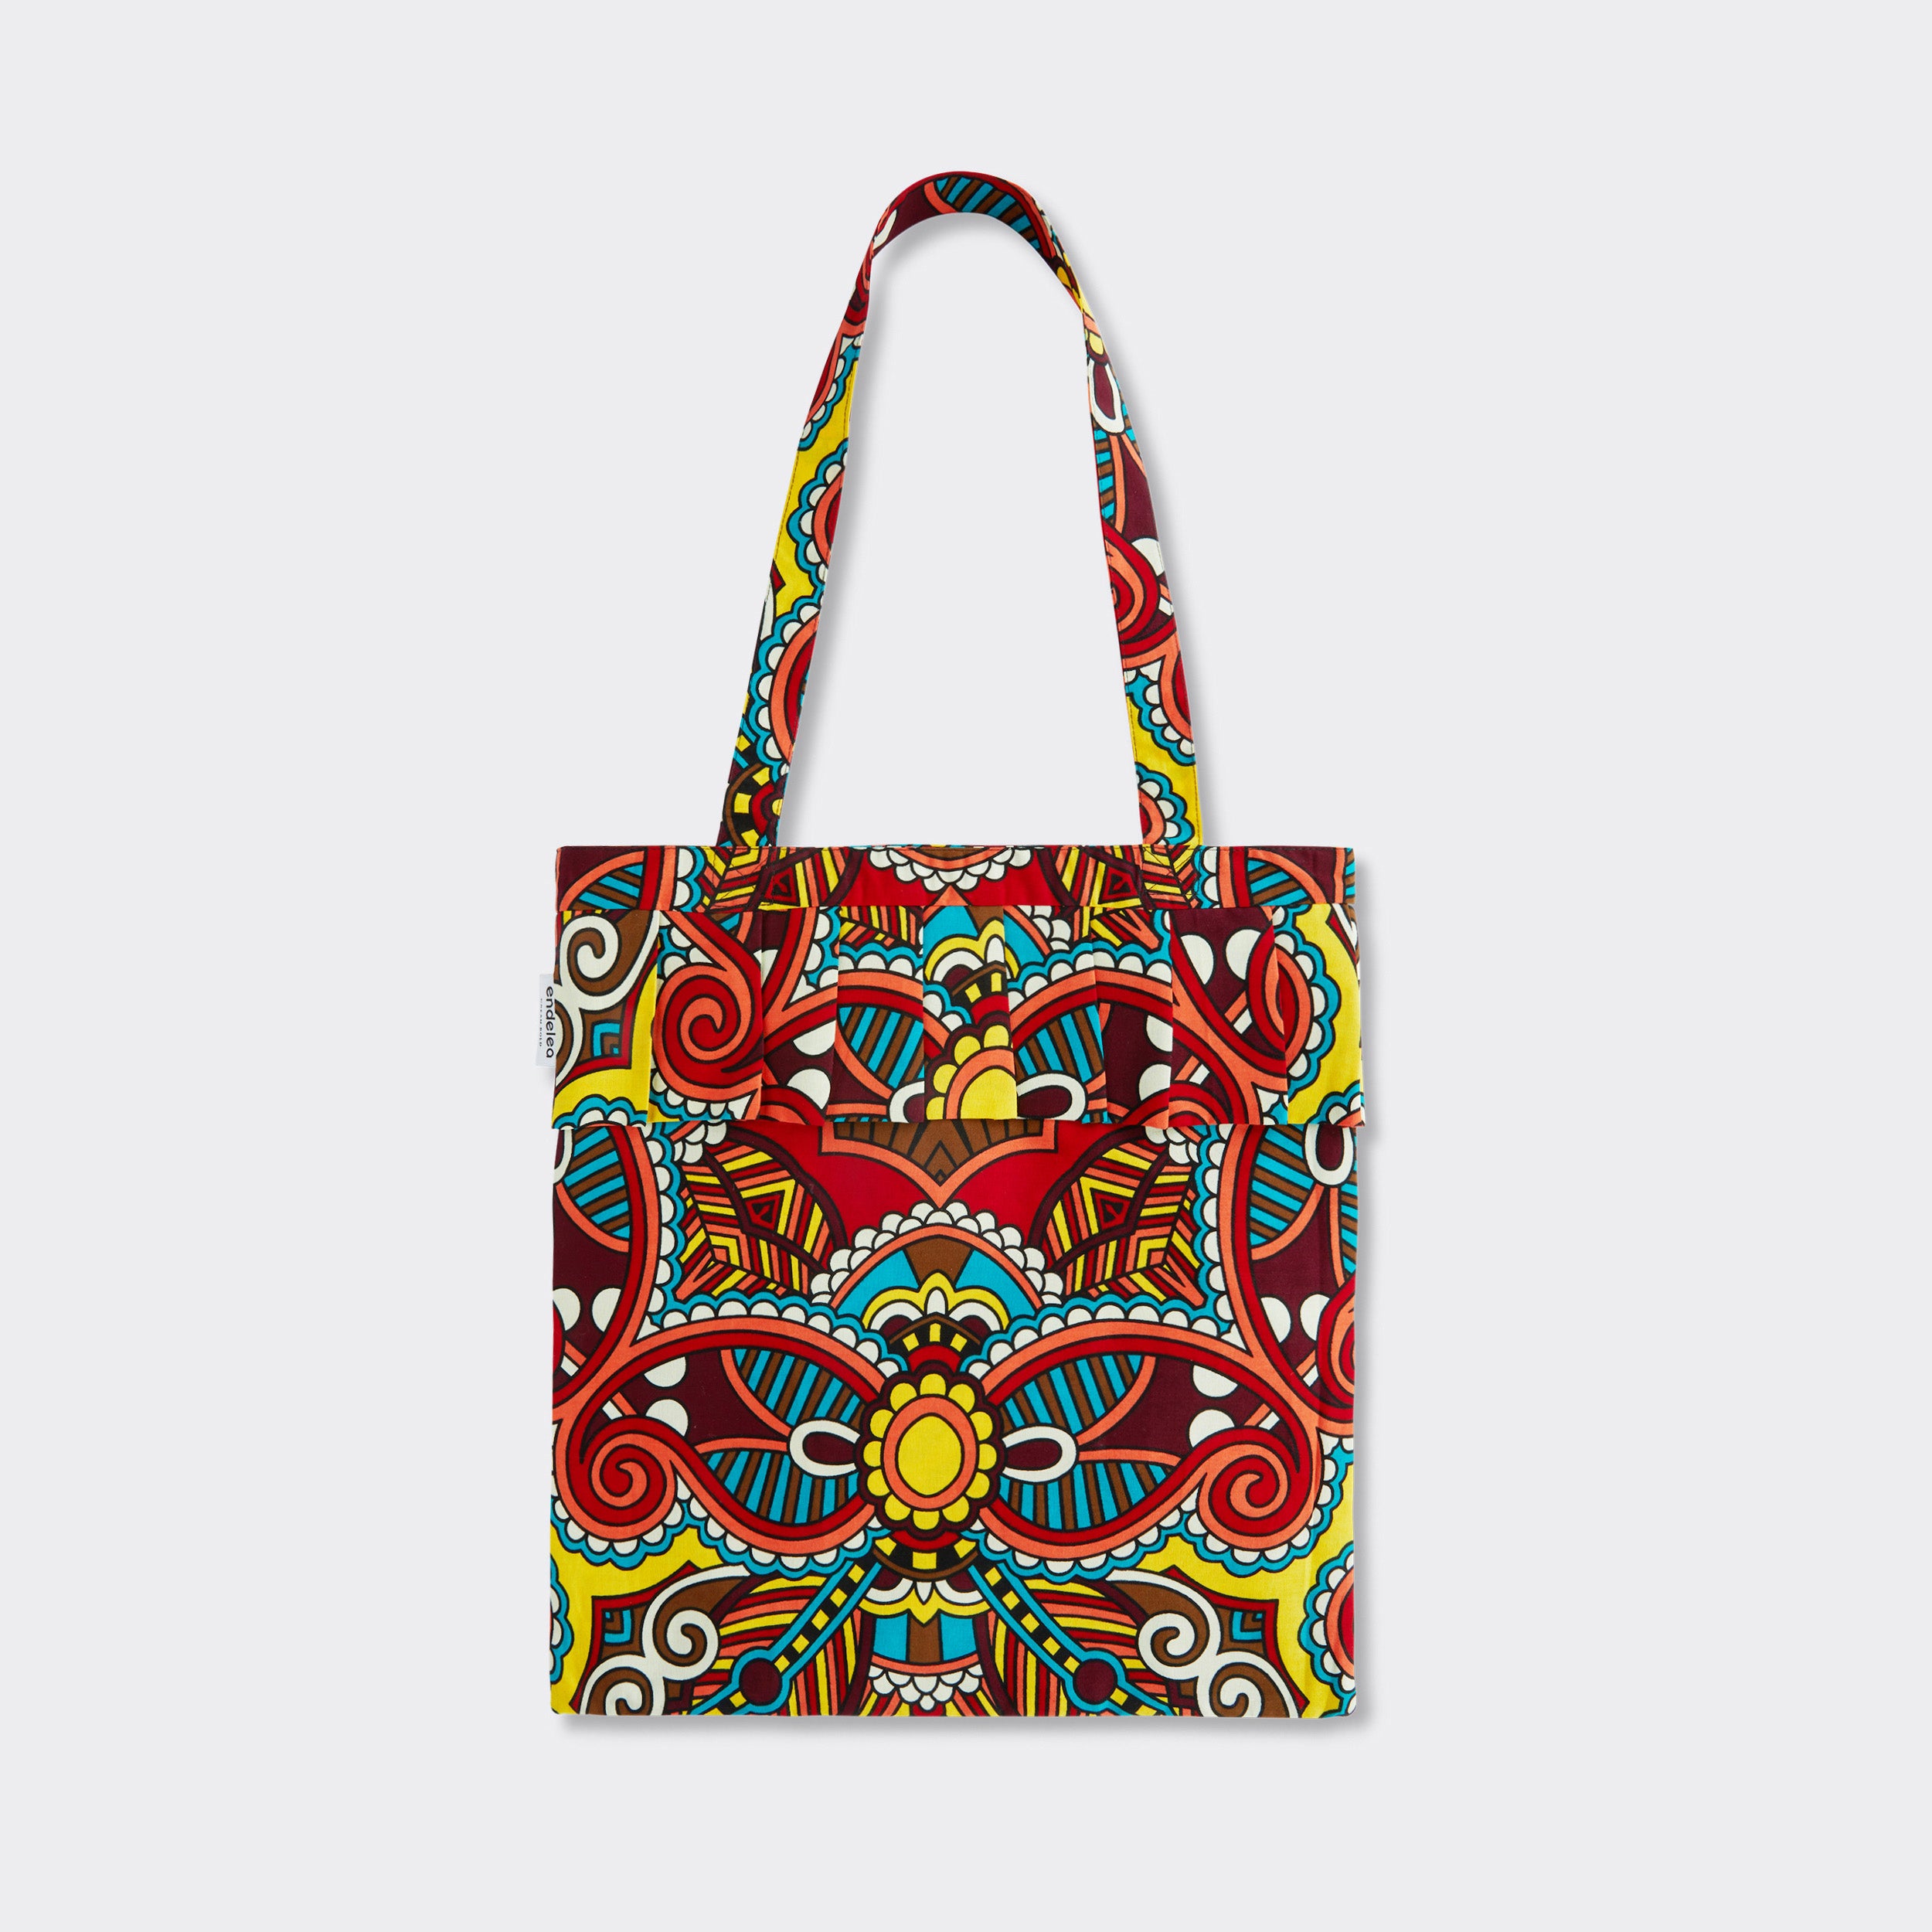 Still life: Tote Bag with Rouche in Wax African Dream with colors red, blue, yellow. 